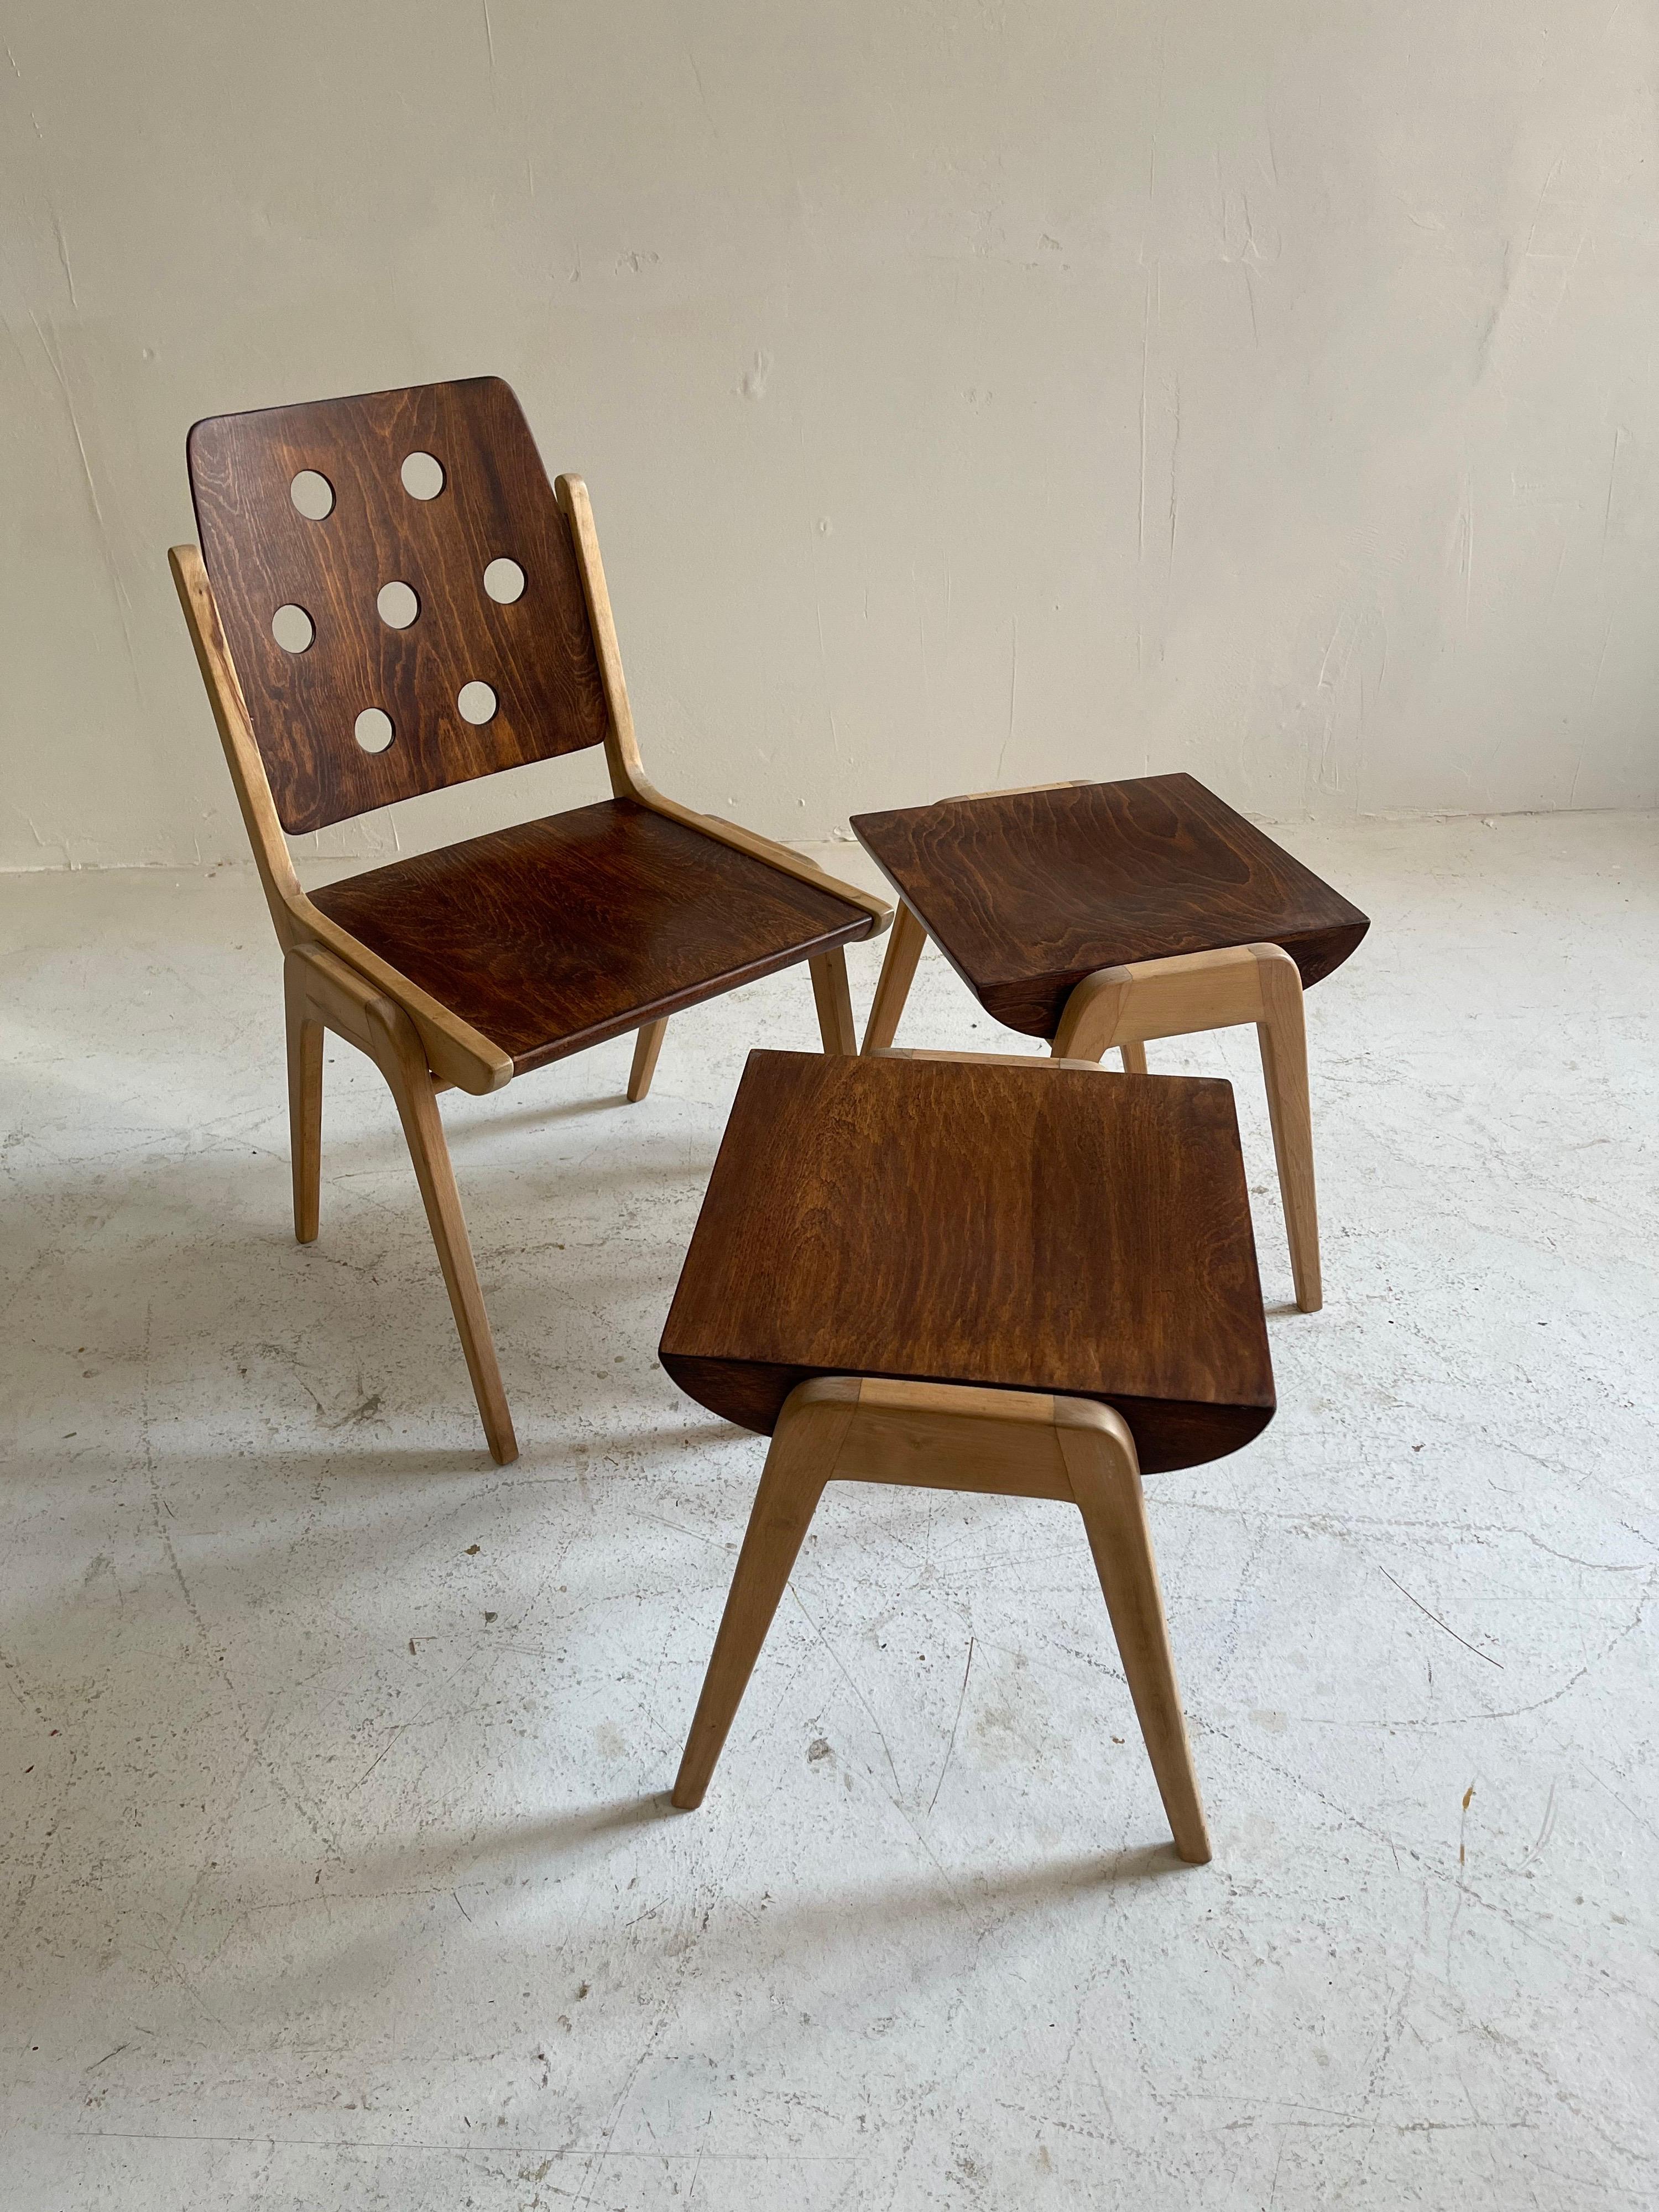 Franz Schuster Model 'Maestro' Dining Room Chairs & Stools, Austria, 1950s For Sale 11